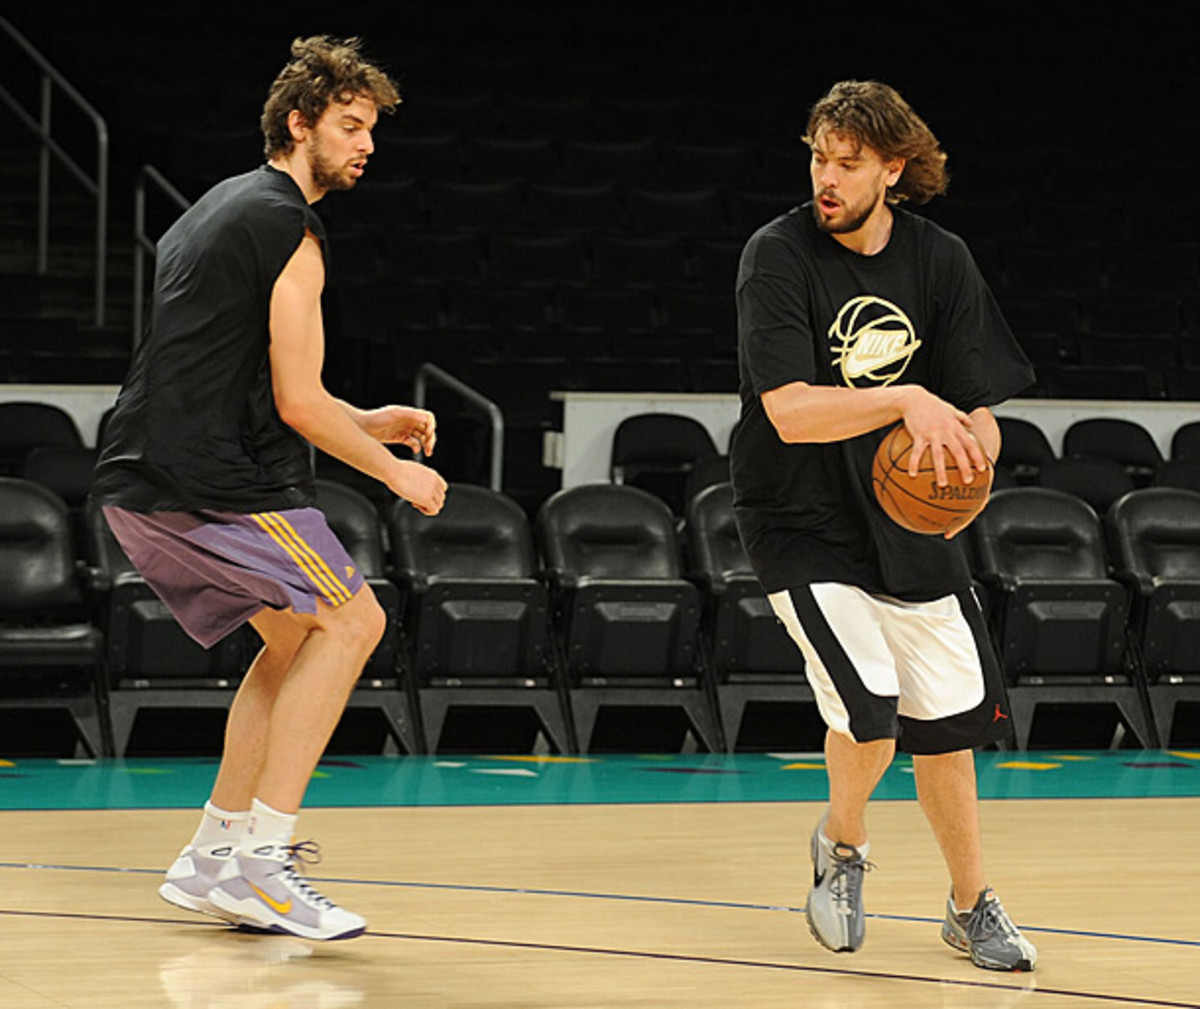 The Gasol brothers - Marc and Pau - play one-on-one. (Andrew D. Bernstein/Getty Images)